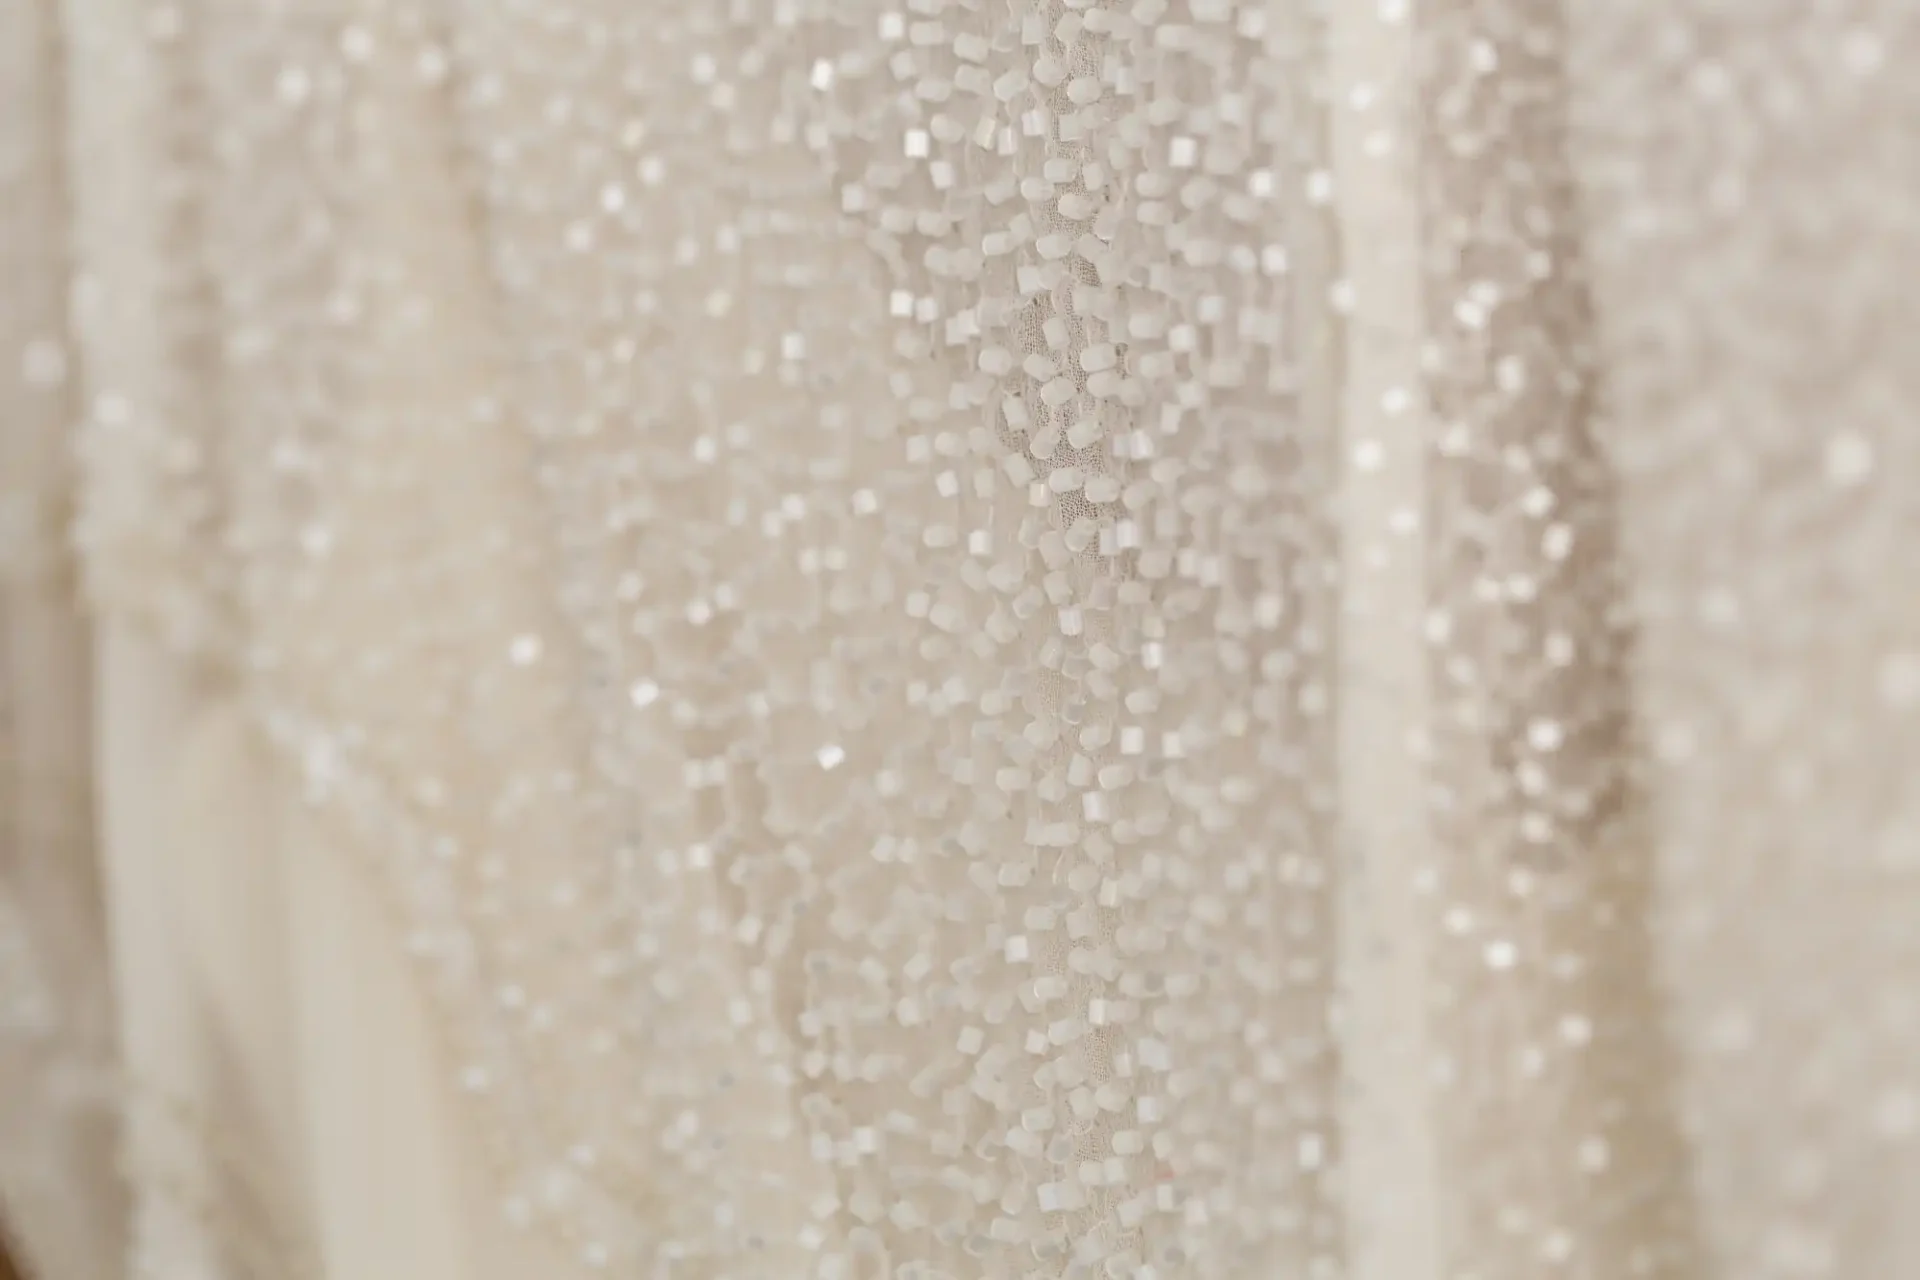 Close-up of a beige fabric adorned with numerous small, shiny beads creating a textured, glittery surface.